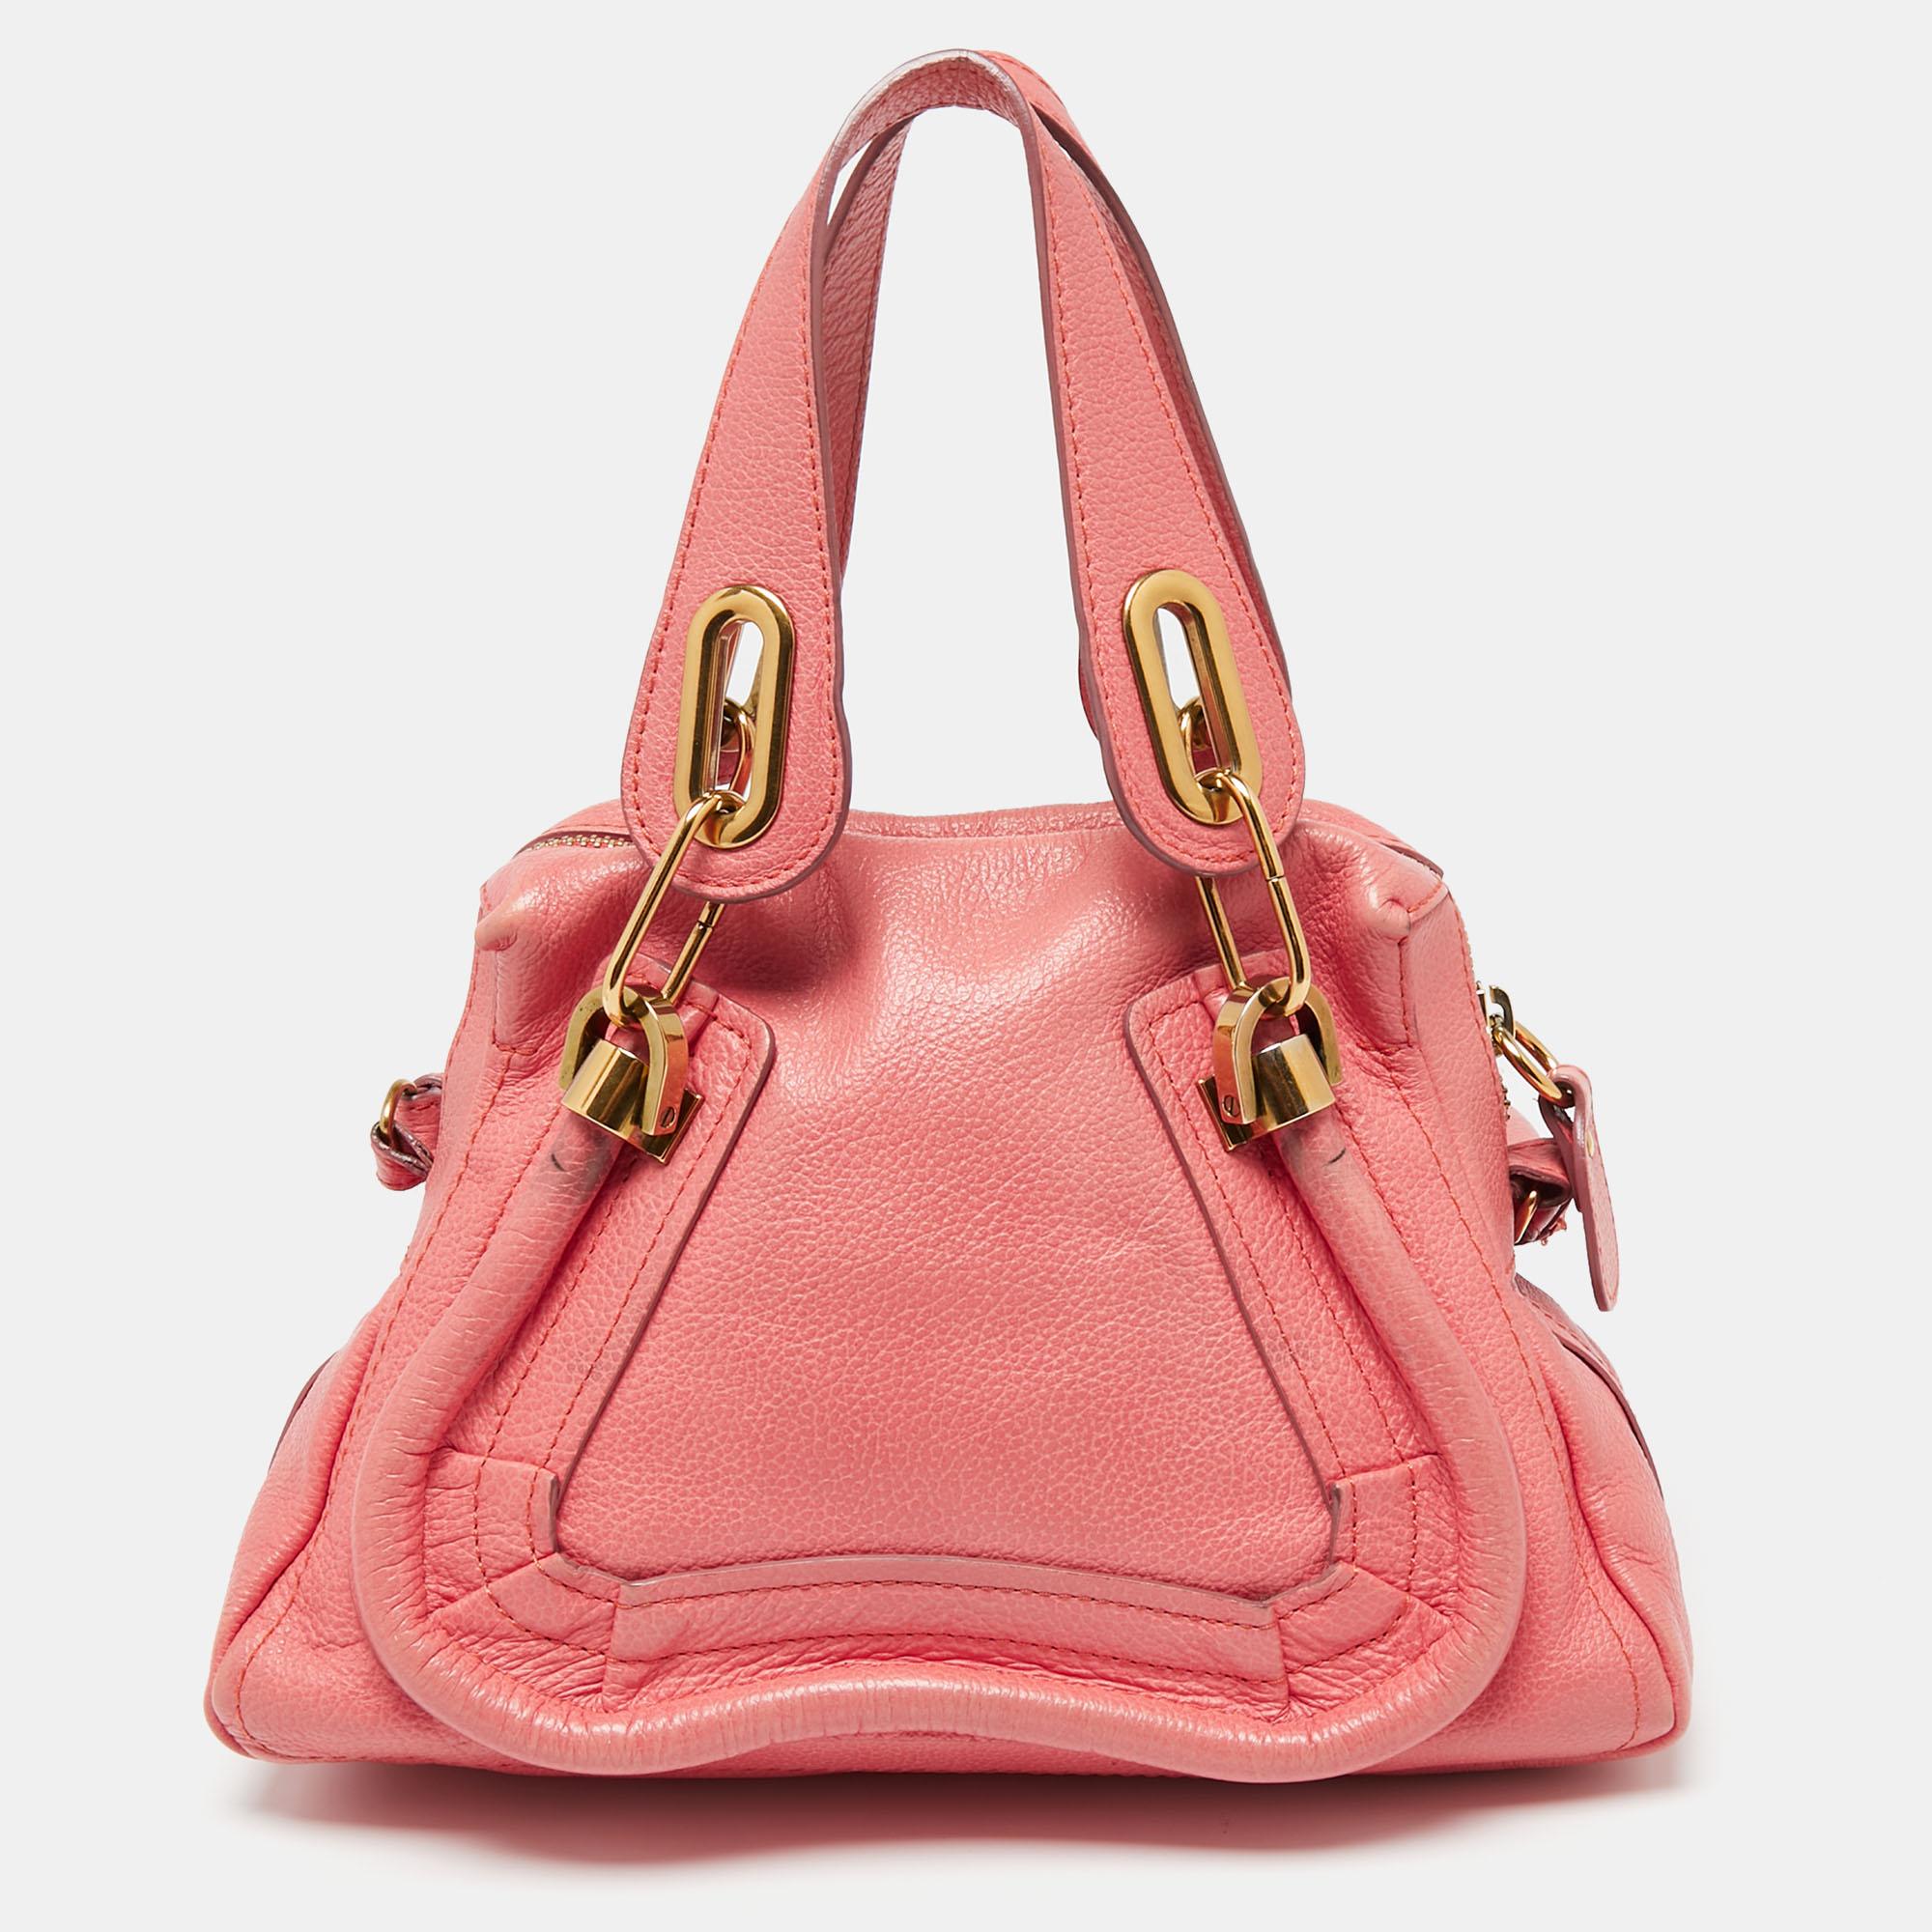 As one of Chloé's most loved bags, the Paraty does make a fine addition to any closet. This here is crafted from leather and gold-tone hardware. The coral pink bag has two handles, a shoulder strap, and a spacious fabric-lined interior to hold all